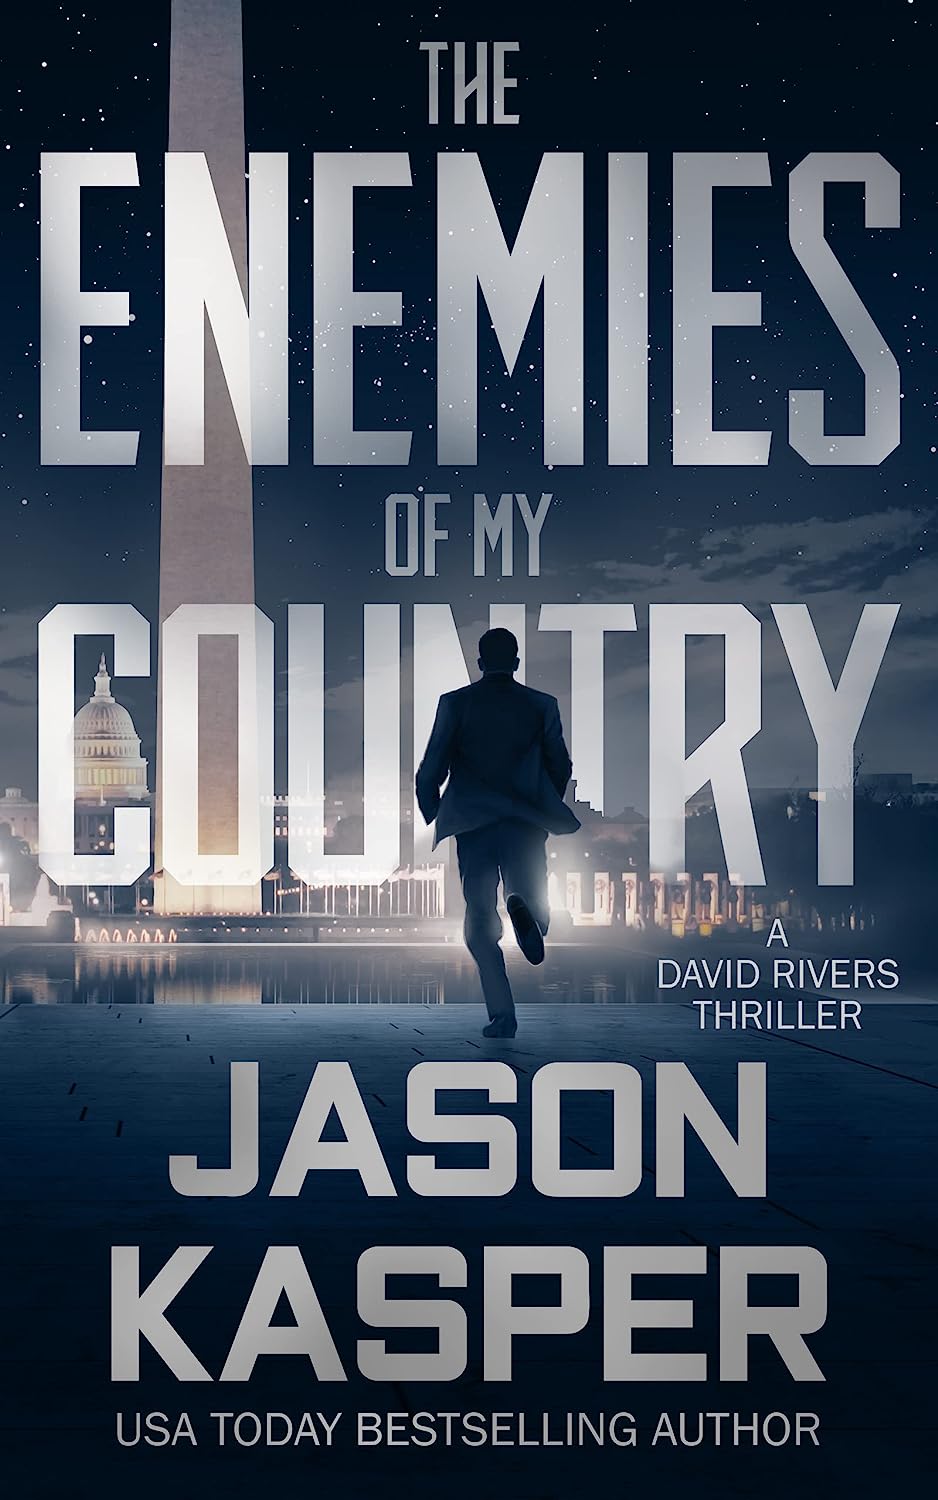 The Enemies of My Country A David Rivers Thriller by USA Today Bestselling Author Jason Kasper